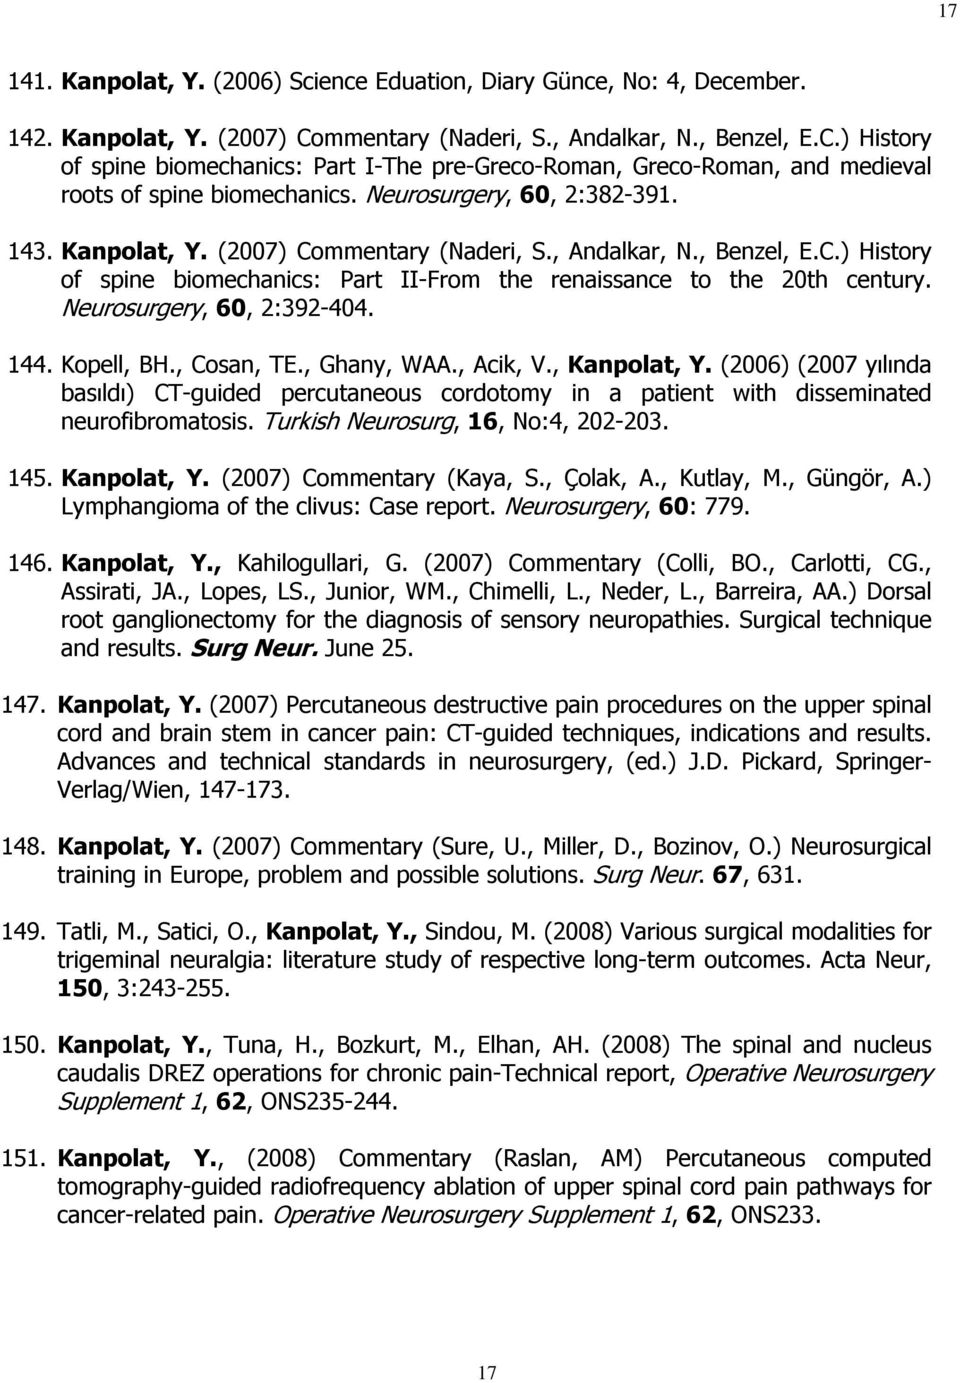 Kanpolat, Y. (2007) Commentary (Naderi, S., Andalkar, N., Benzel, E.C.) History of spine biomechanics: Part II-From the renaissance to the 20th century. Neurosurgery, 60, 2:392-404. 144. Kopell, BH.